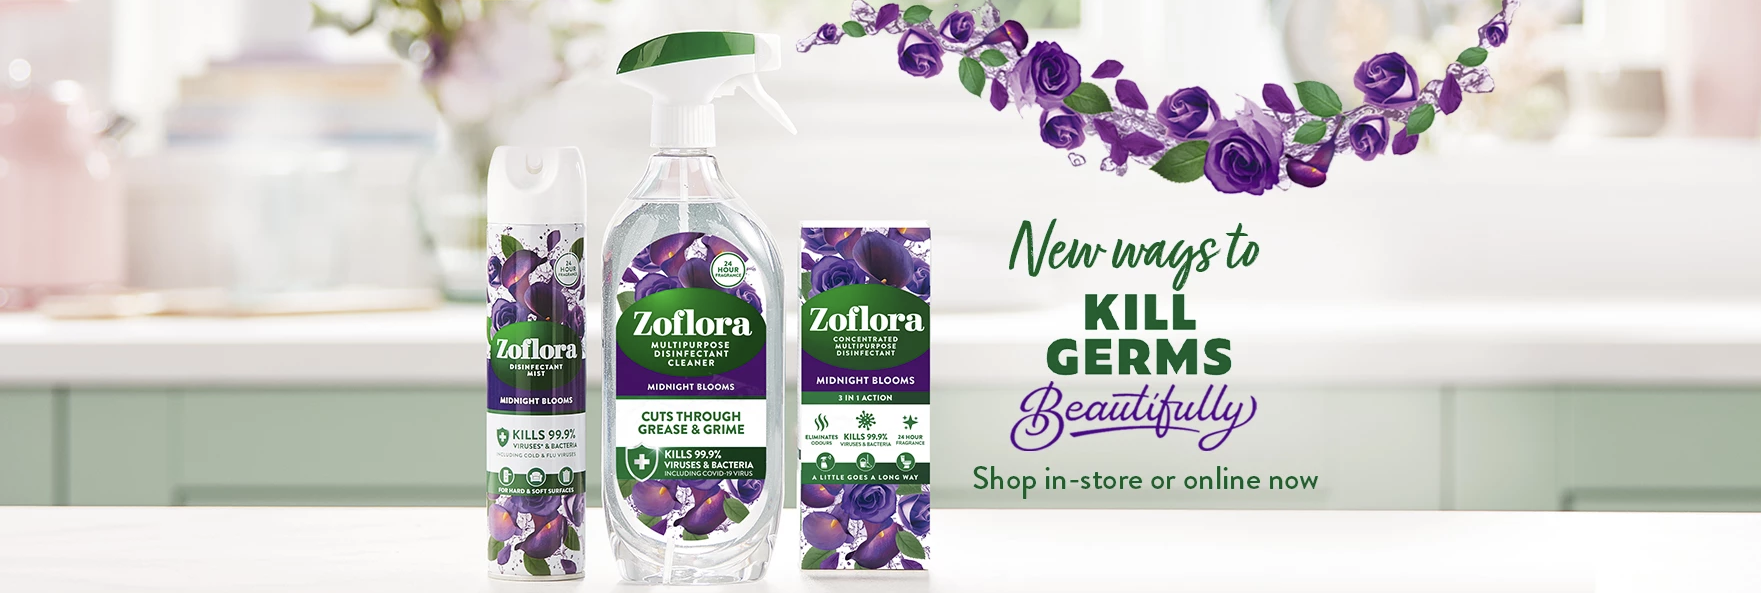 Explore the new Zoflora Disinfectant Mist range at Salons Direct